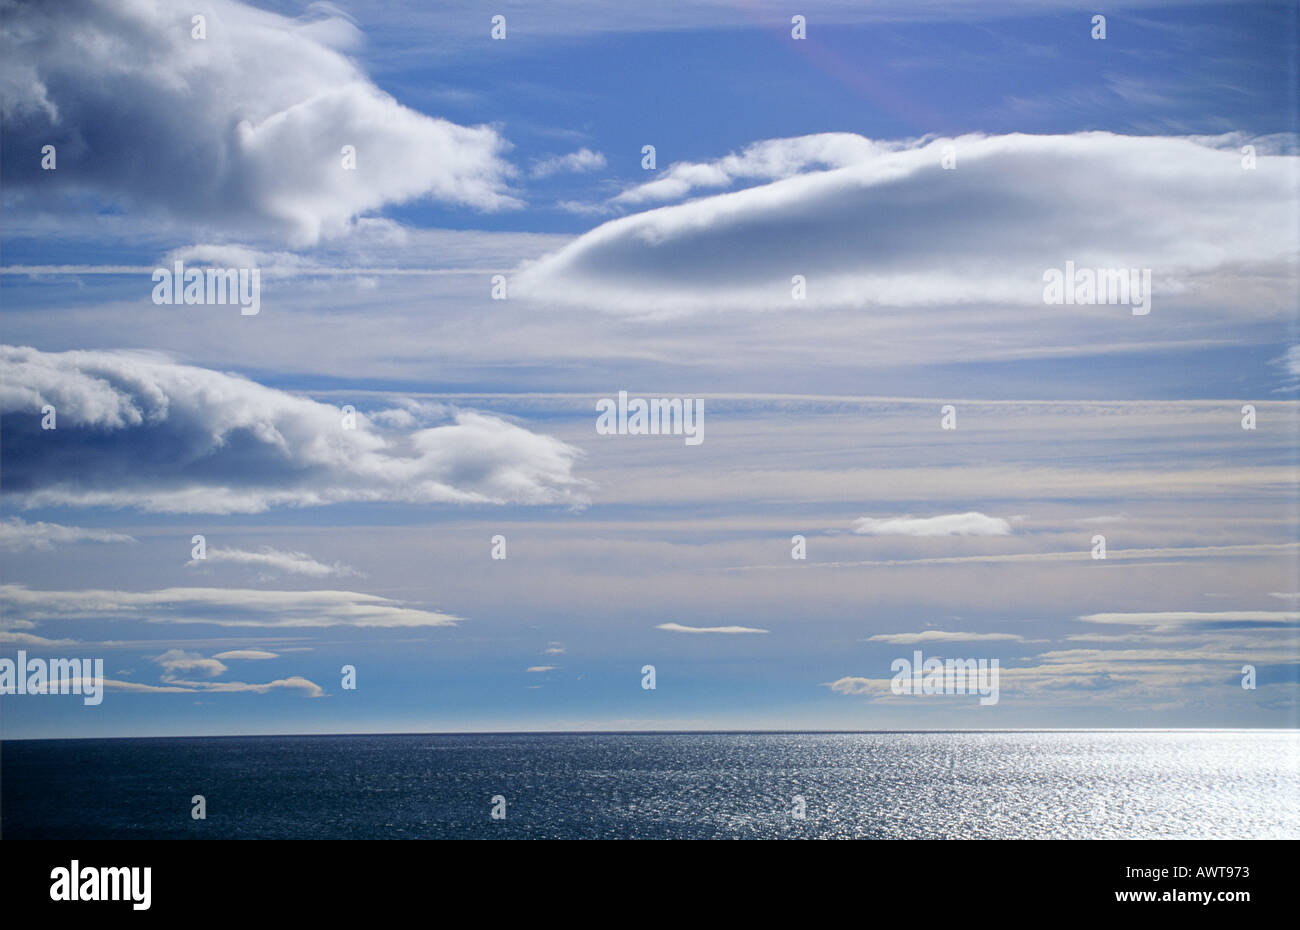 Clouds and sky Lenticular Altocumulus clouds over the sea Stock Photo